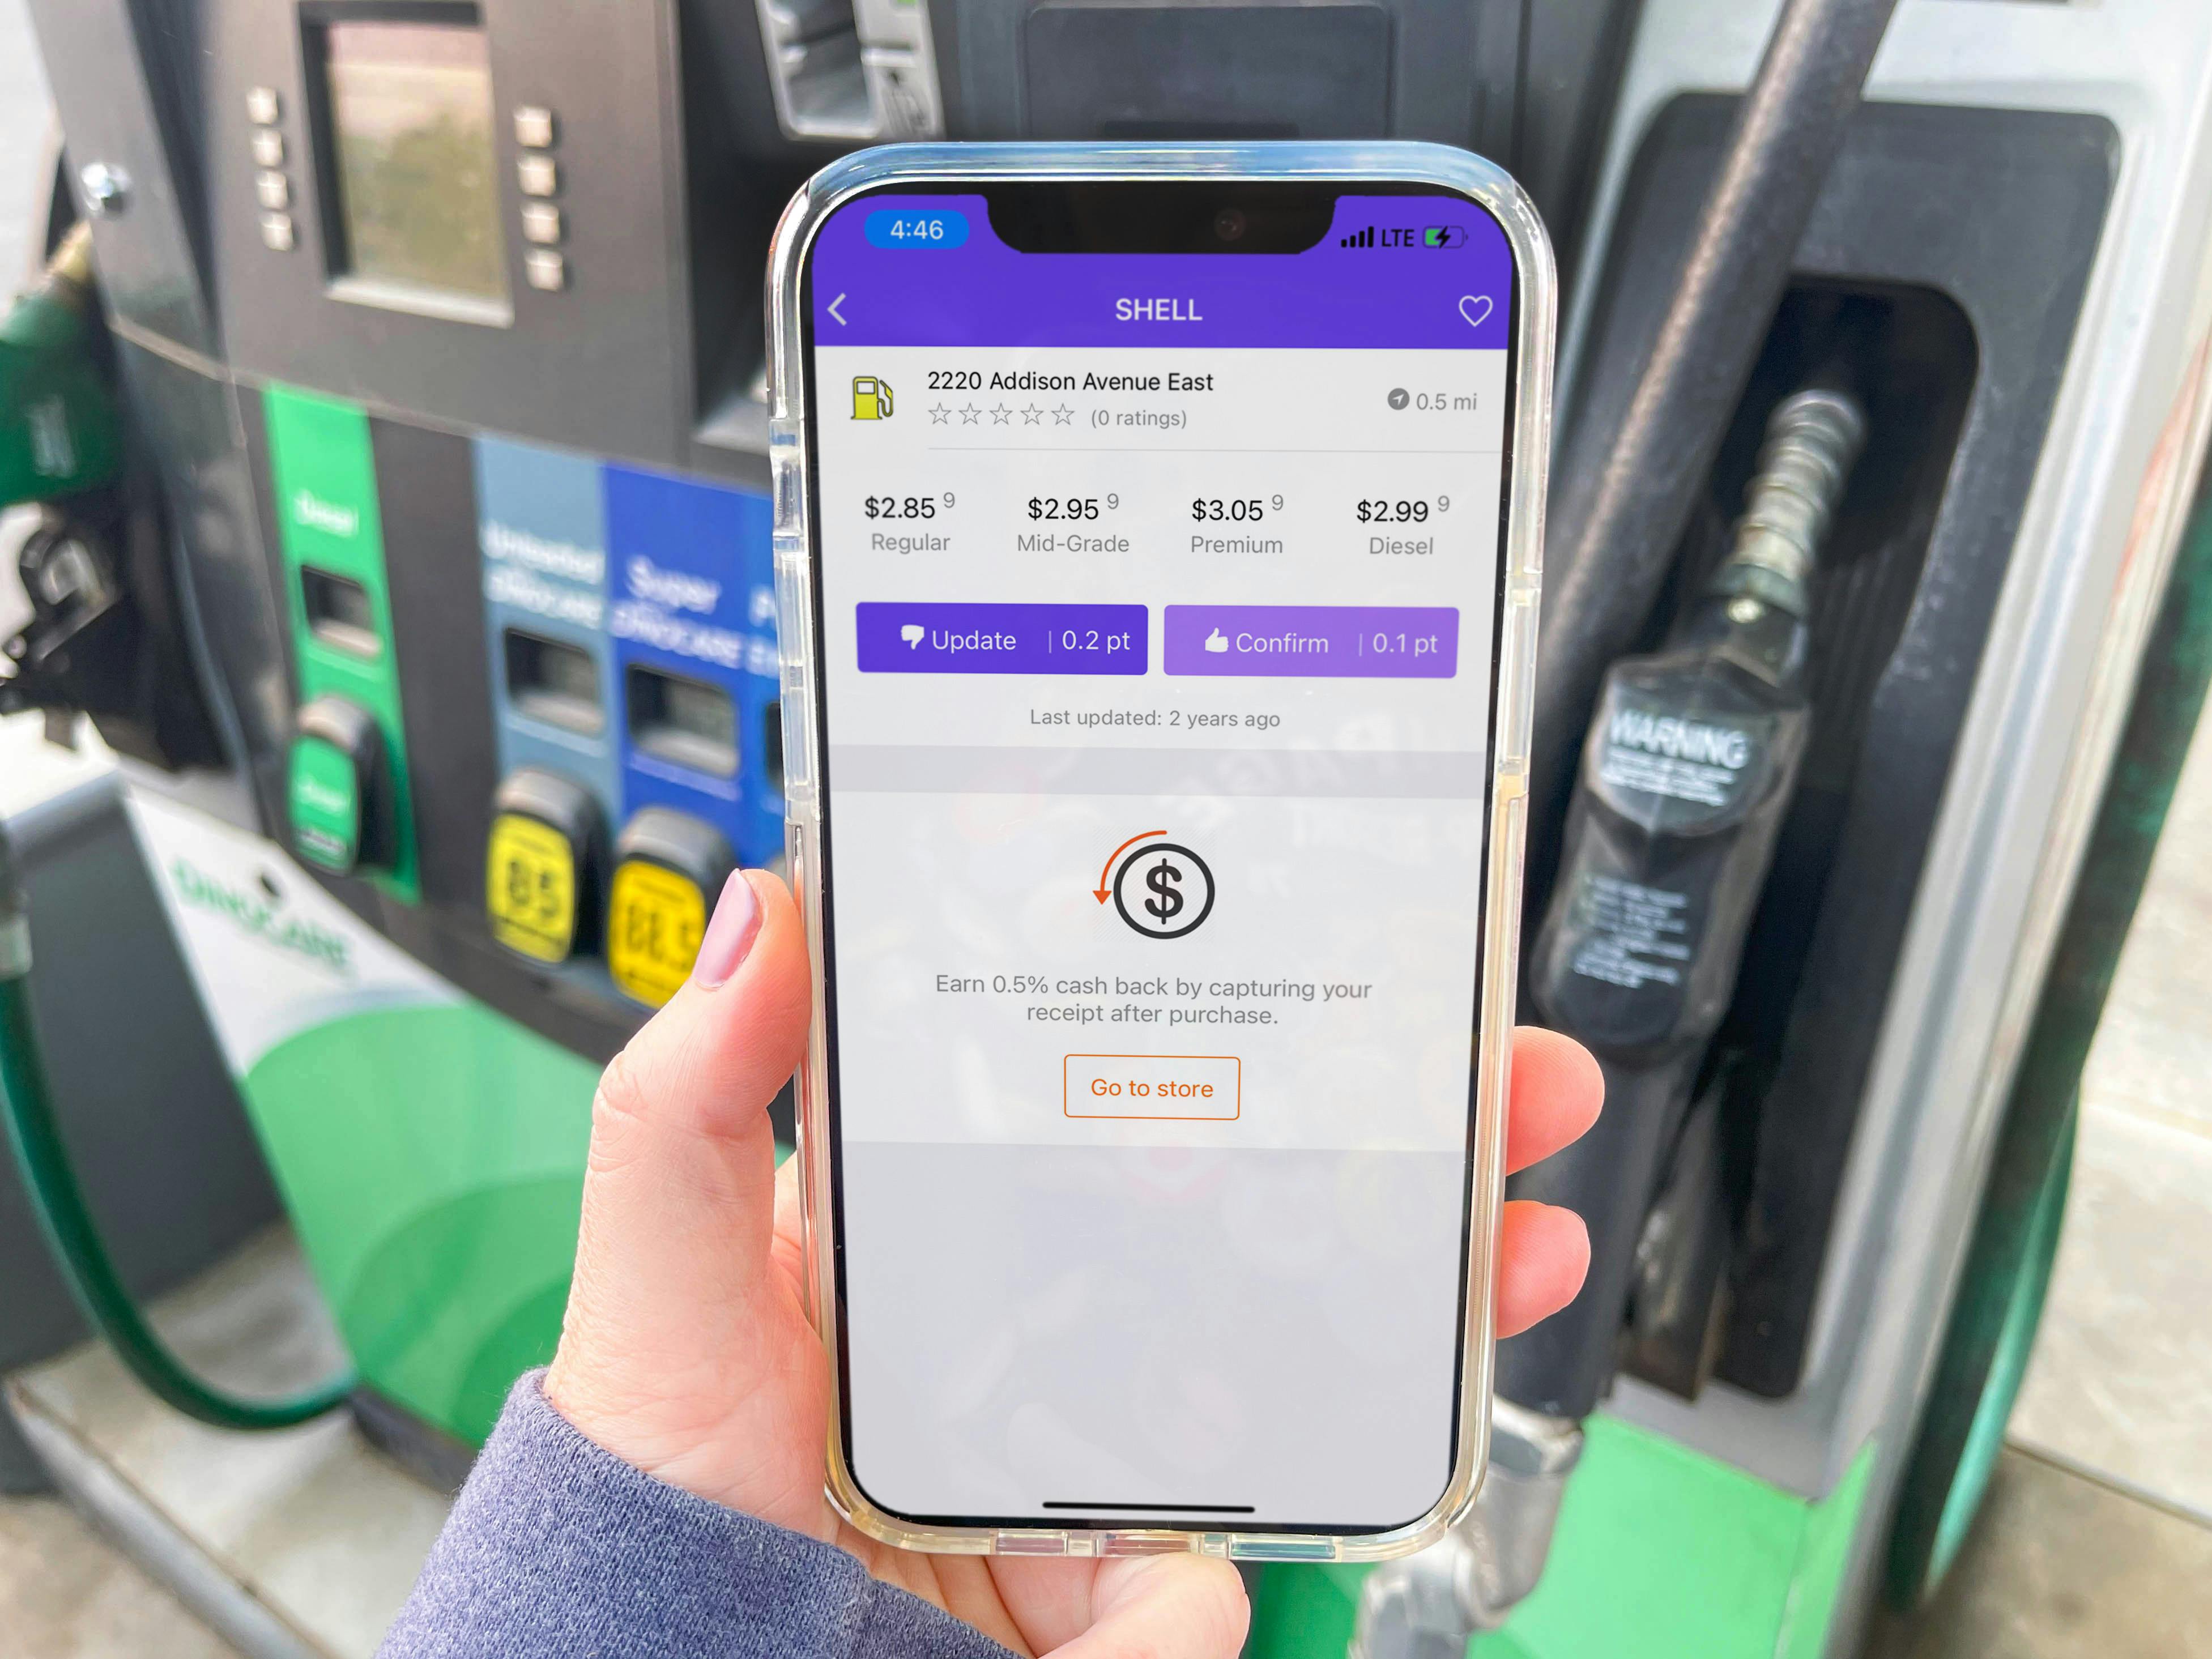 cellphone being held in front of gas pump with the TruNow app displayed